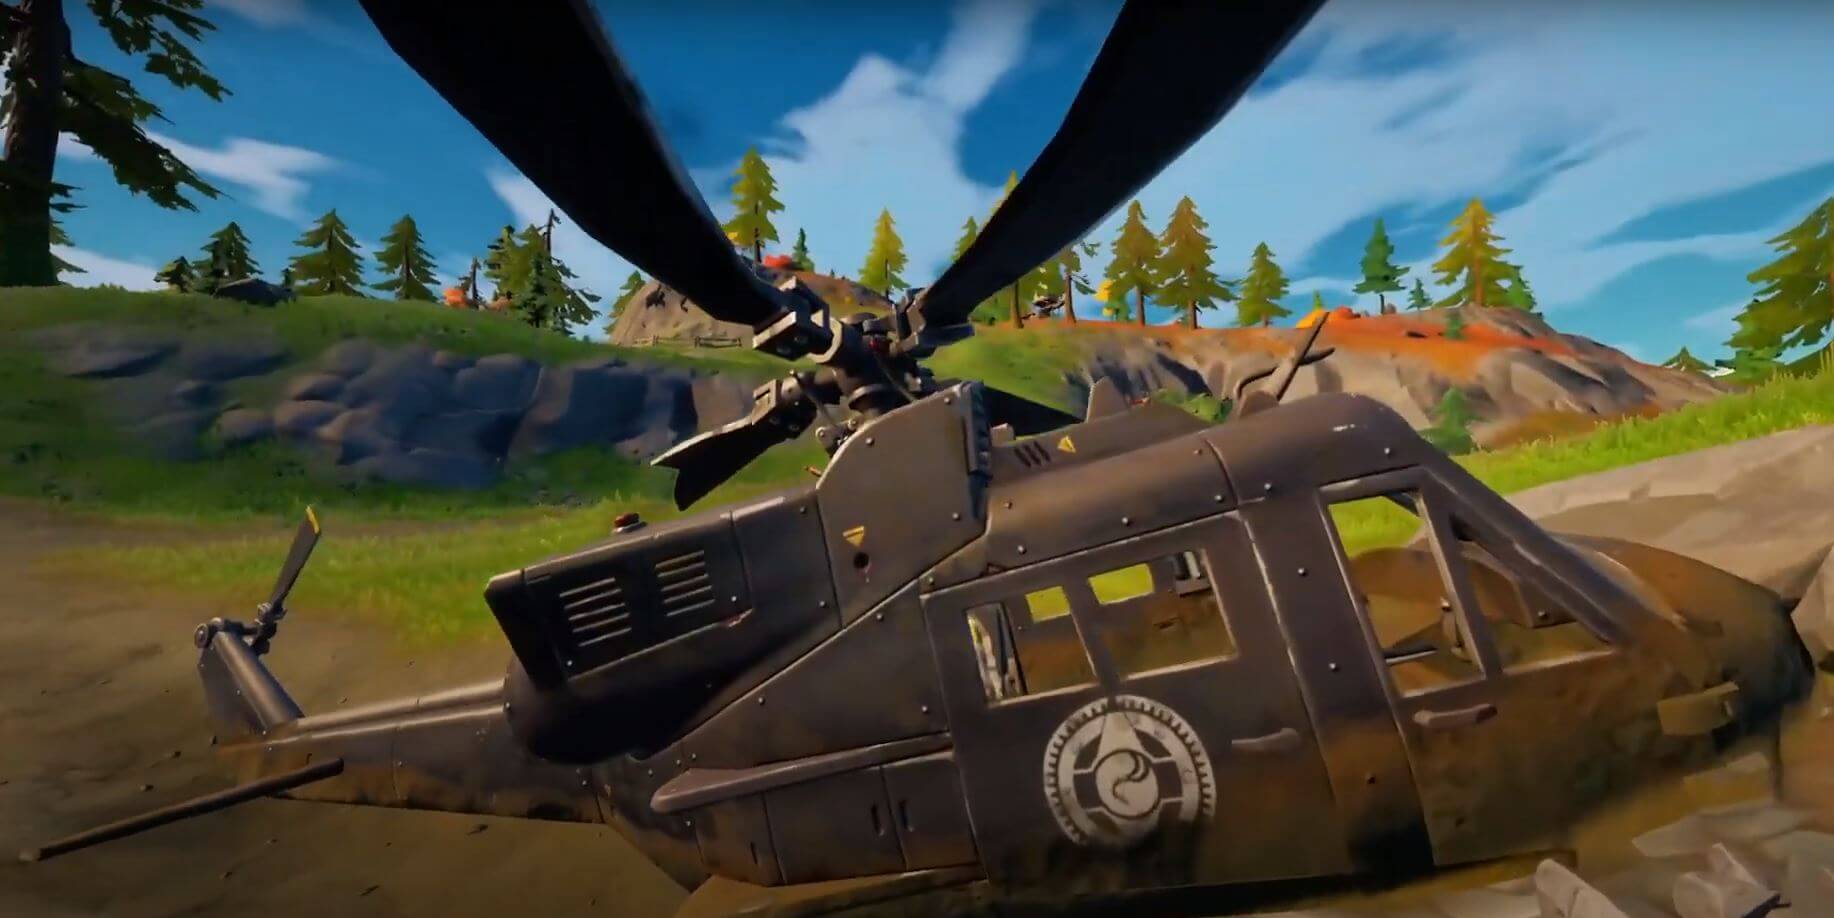 Fortnite Investigate A Downed Black Helicopter